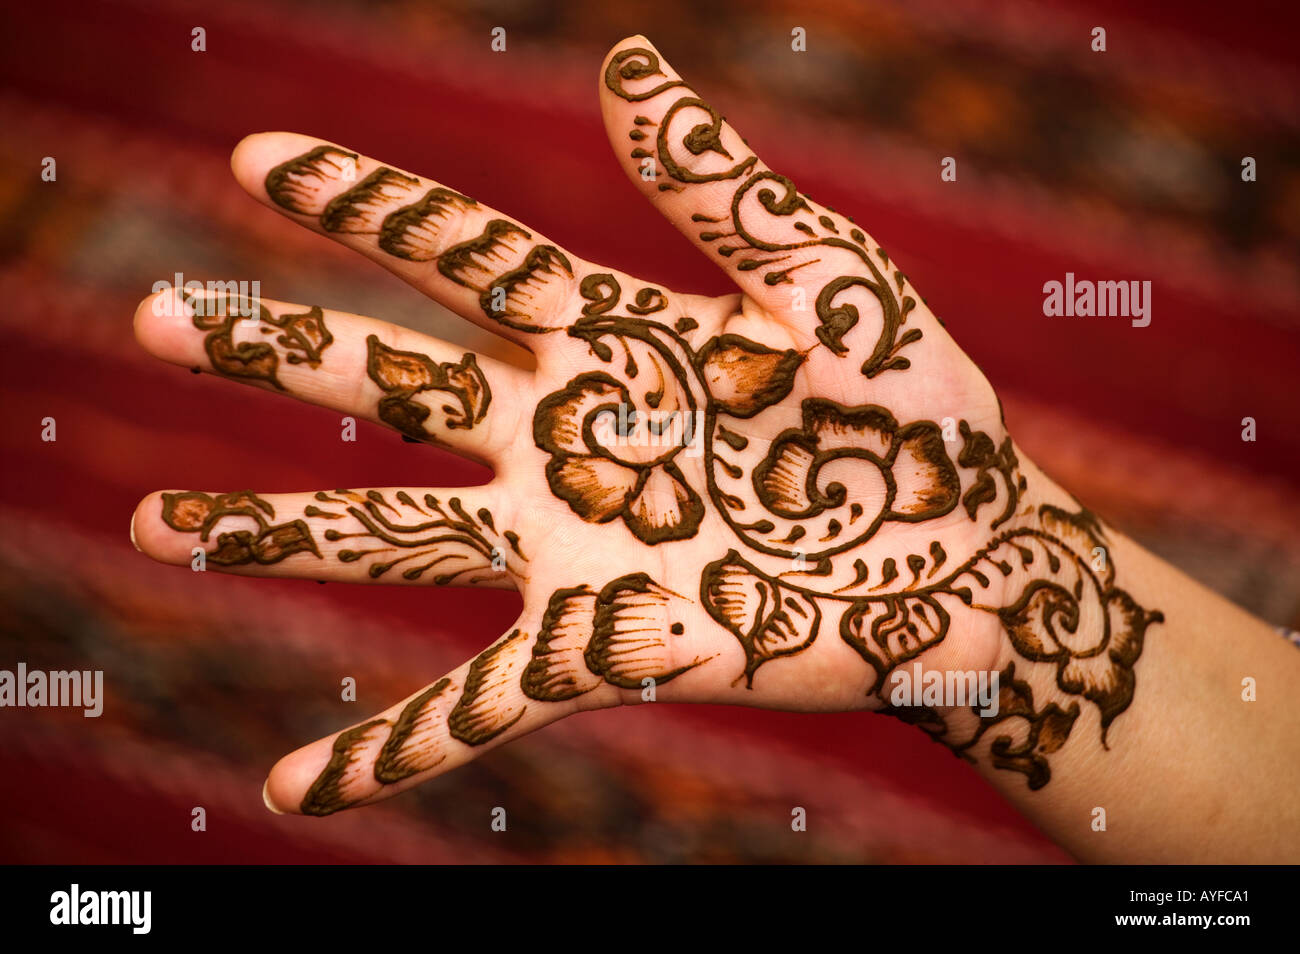 Henna Is Used To Decorate Womans Hands And Feet Model Released